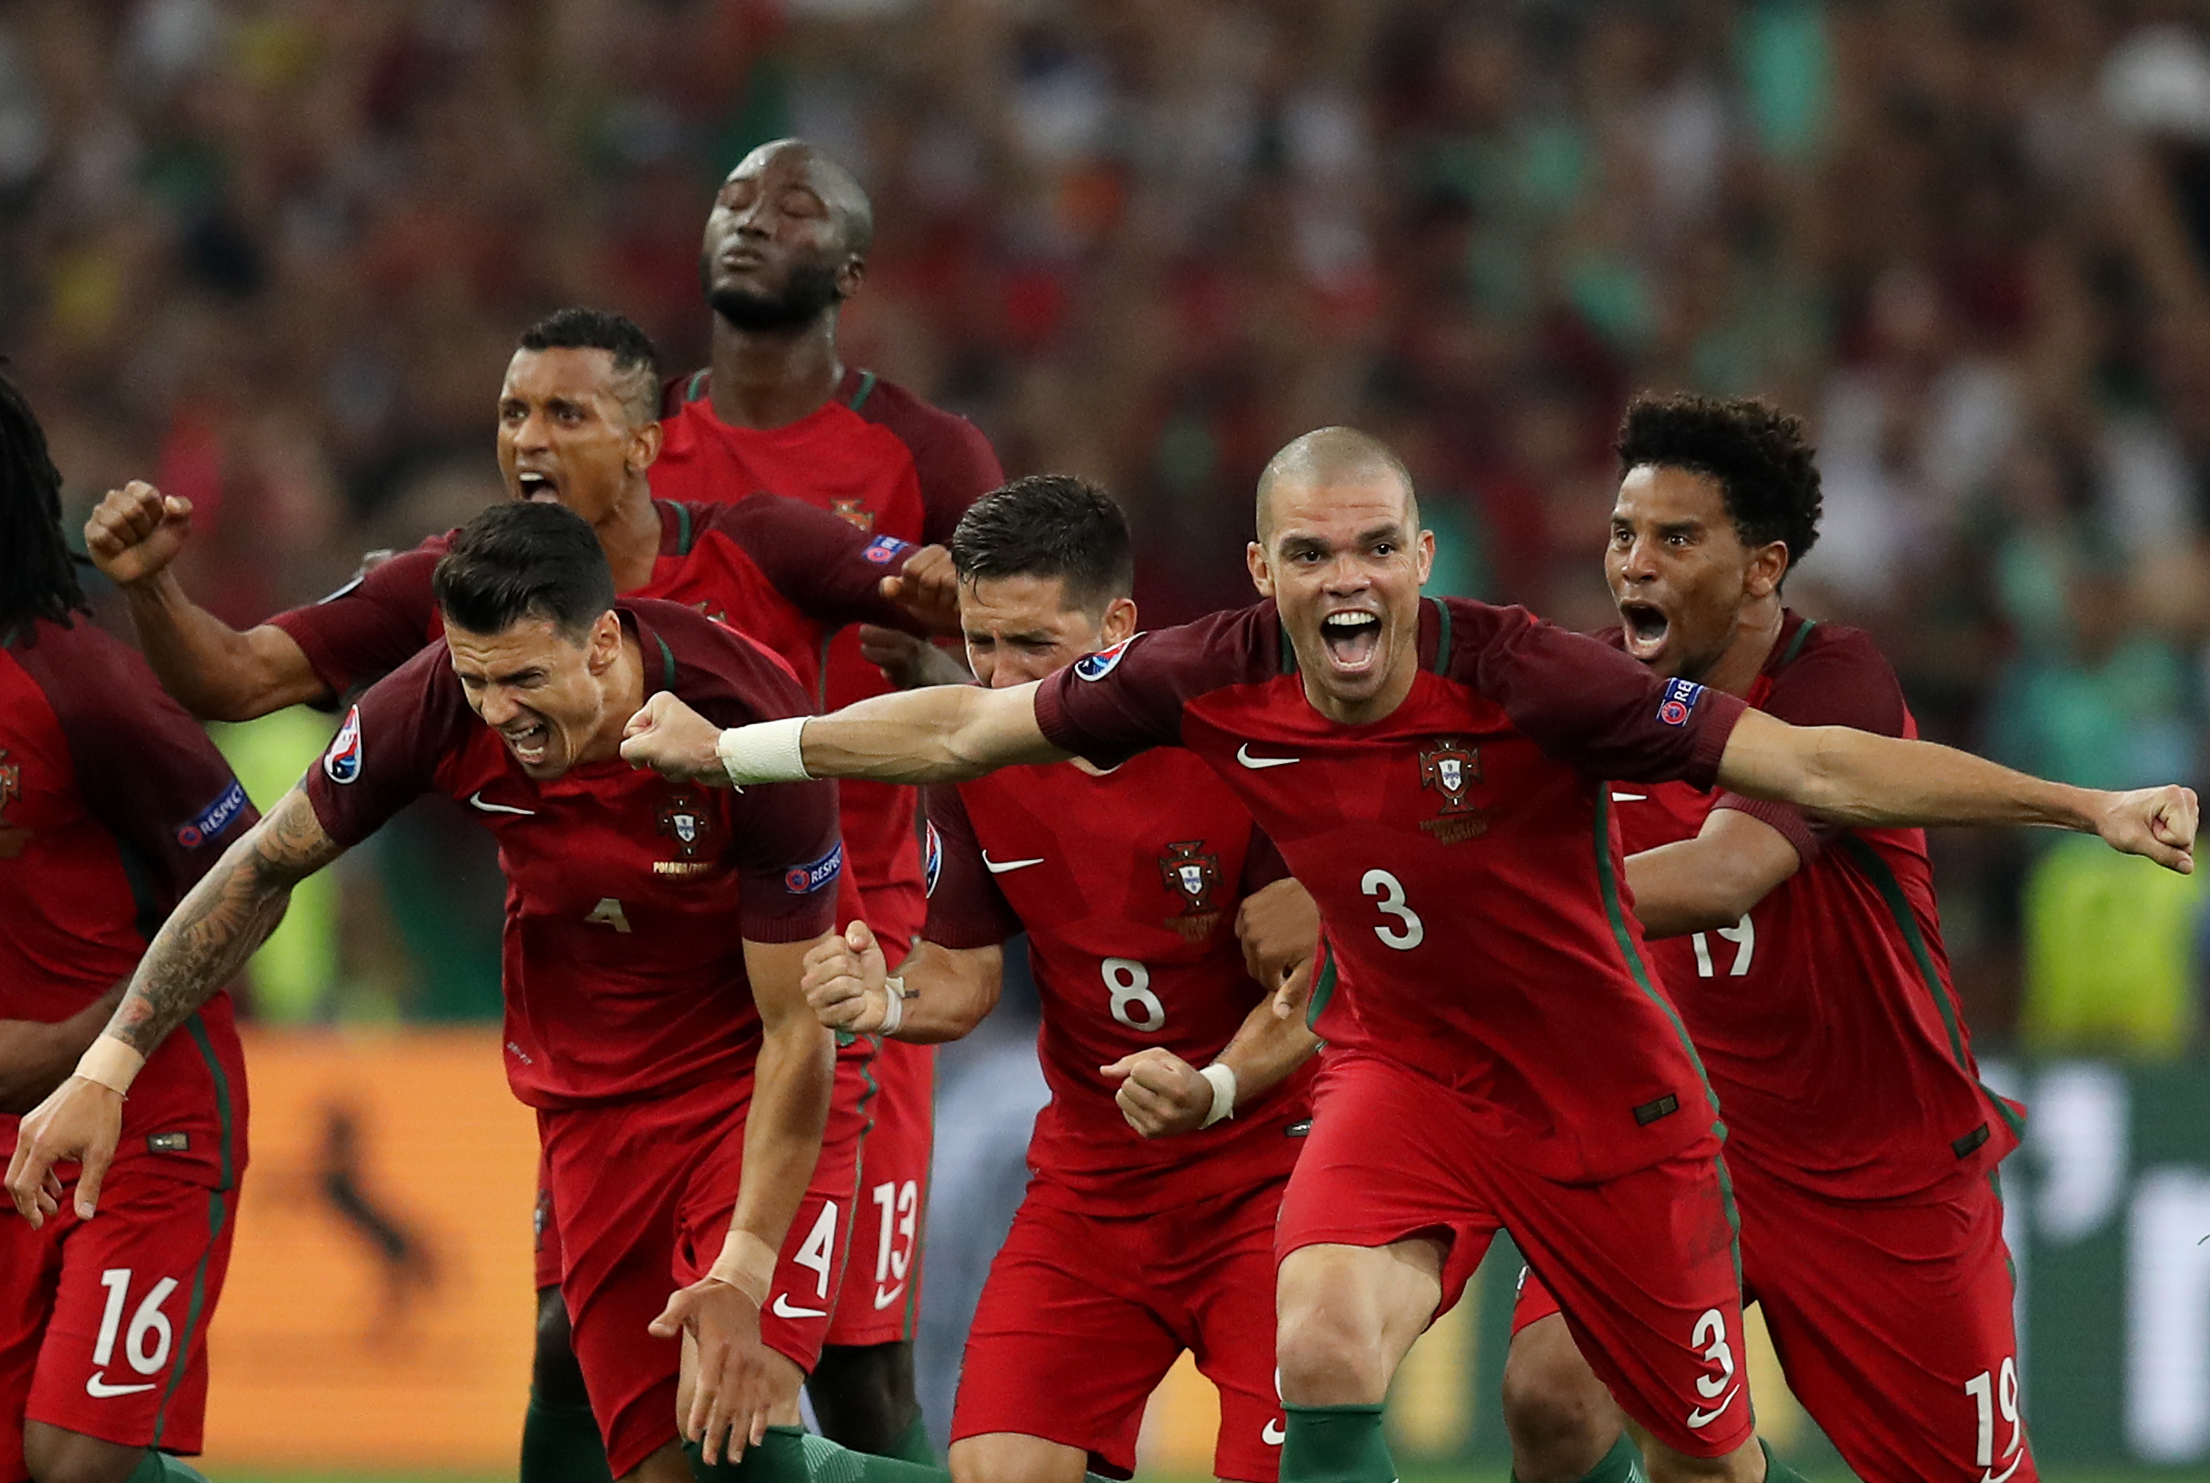 Portugal's players celebrate after winning the Euro 2016 quarter-final football match between Poland and Portugal at the Stade Velodrome in Marseille on June 30, 2016. / AFP / Valery HACHE        (Photo credit should read VALERY HACHE/AFP/Getty Images)